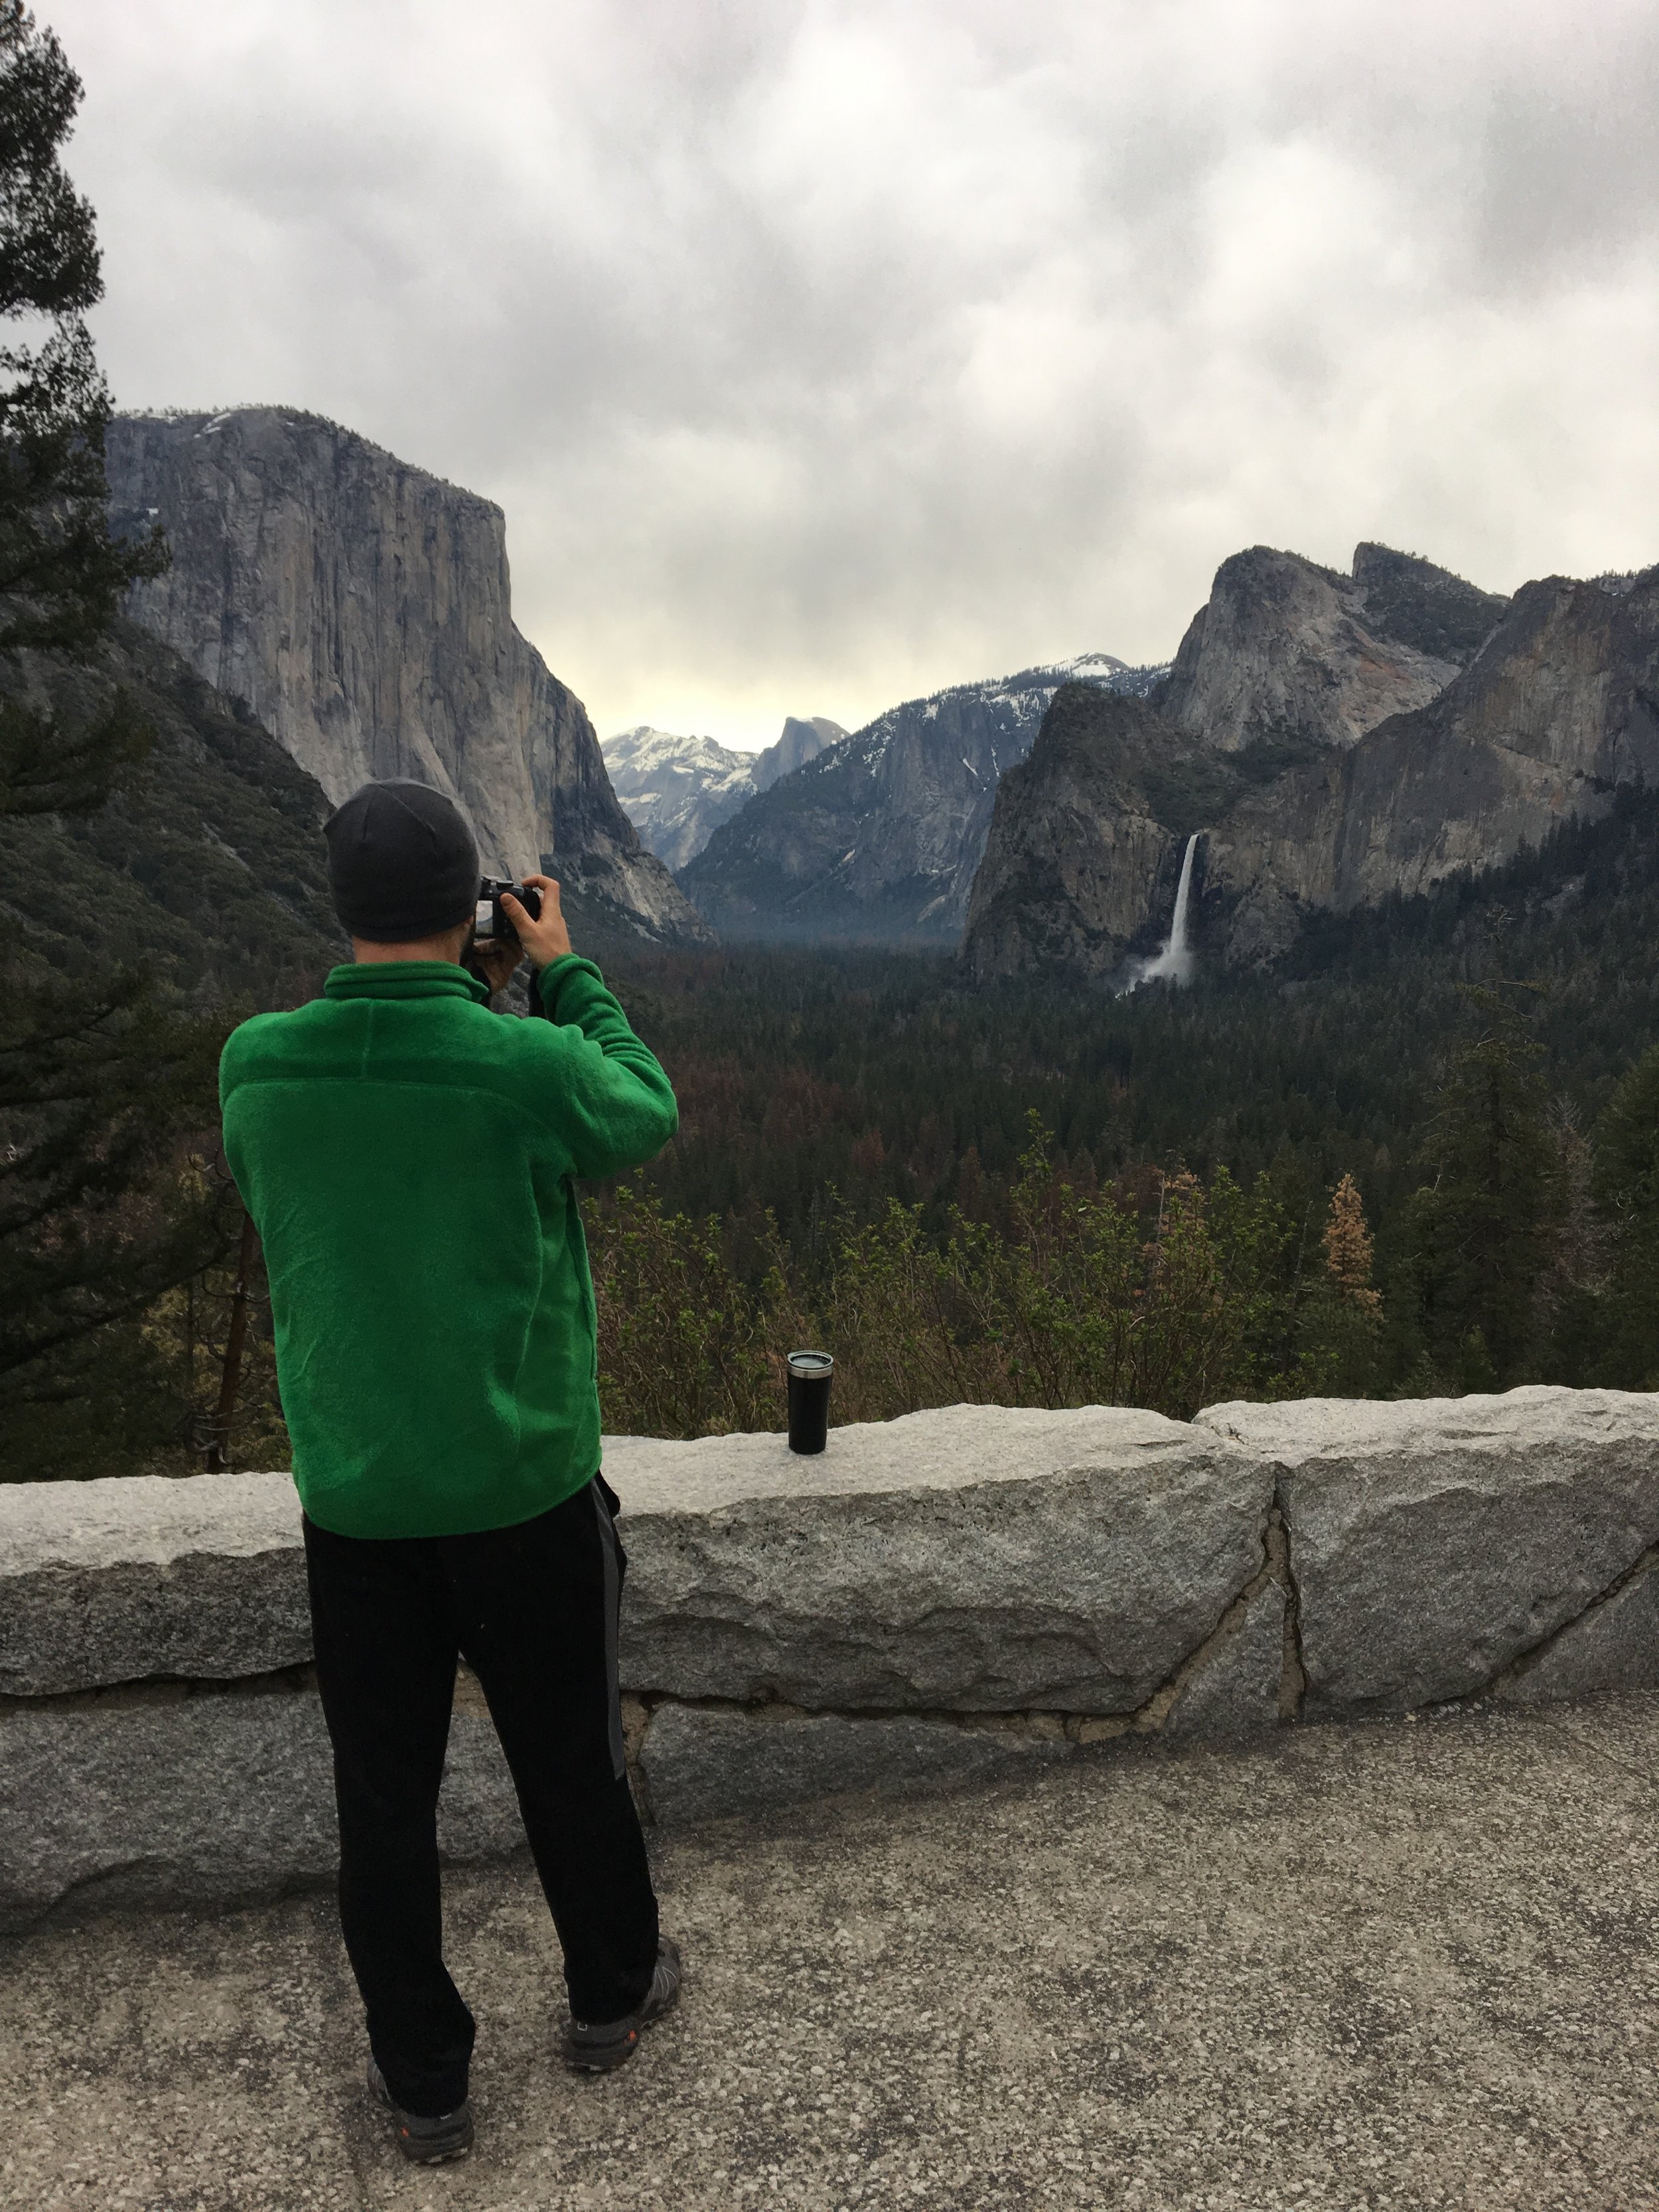  My handsome photographer in his ugly green jacket (which I have dubbed “The Grinch”) photographing Tunnel View 